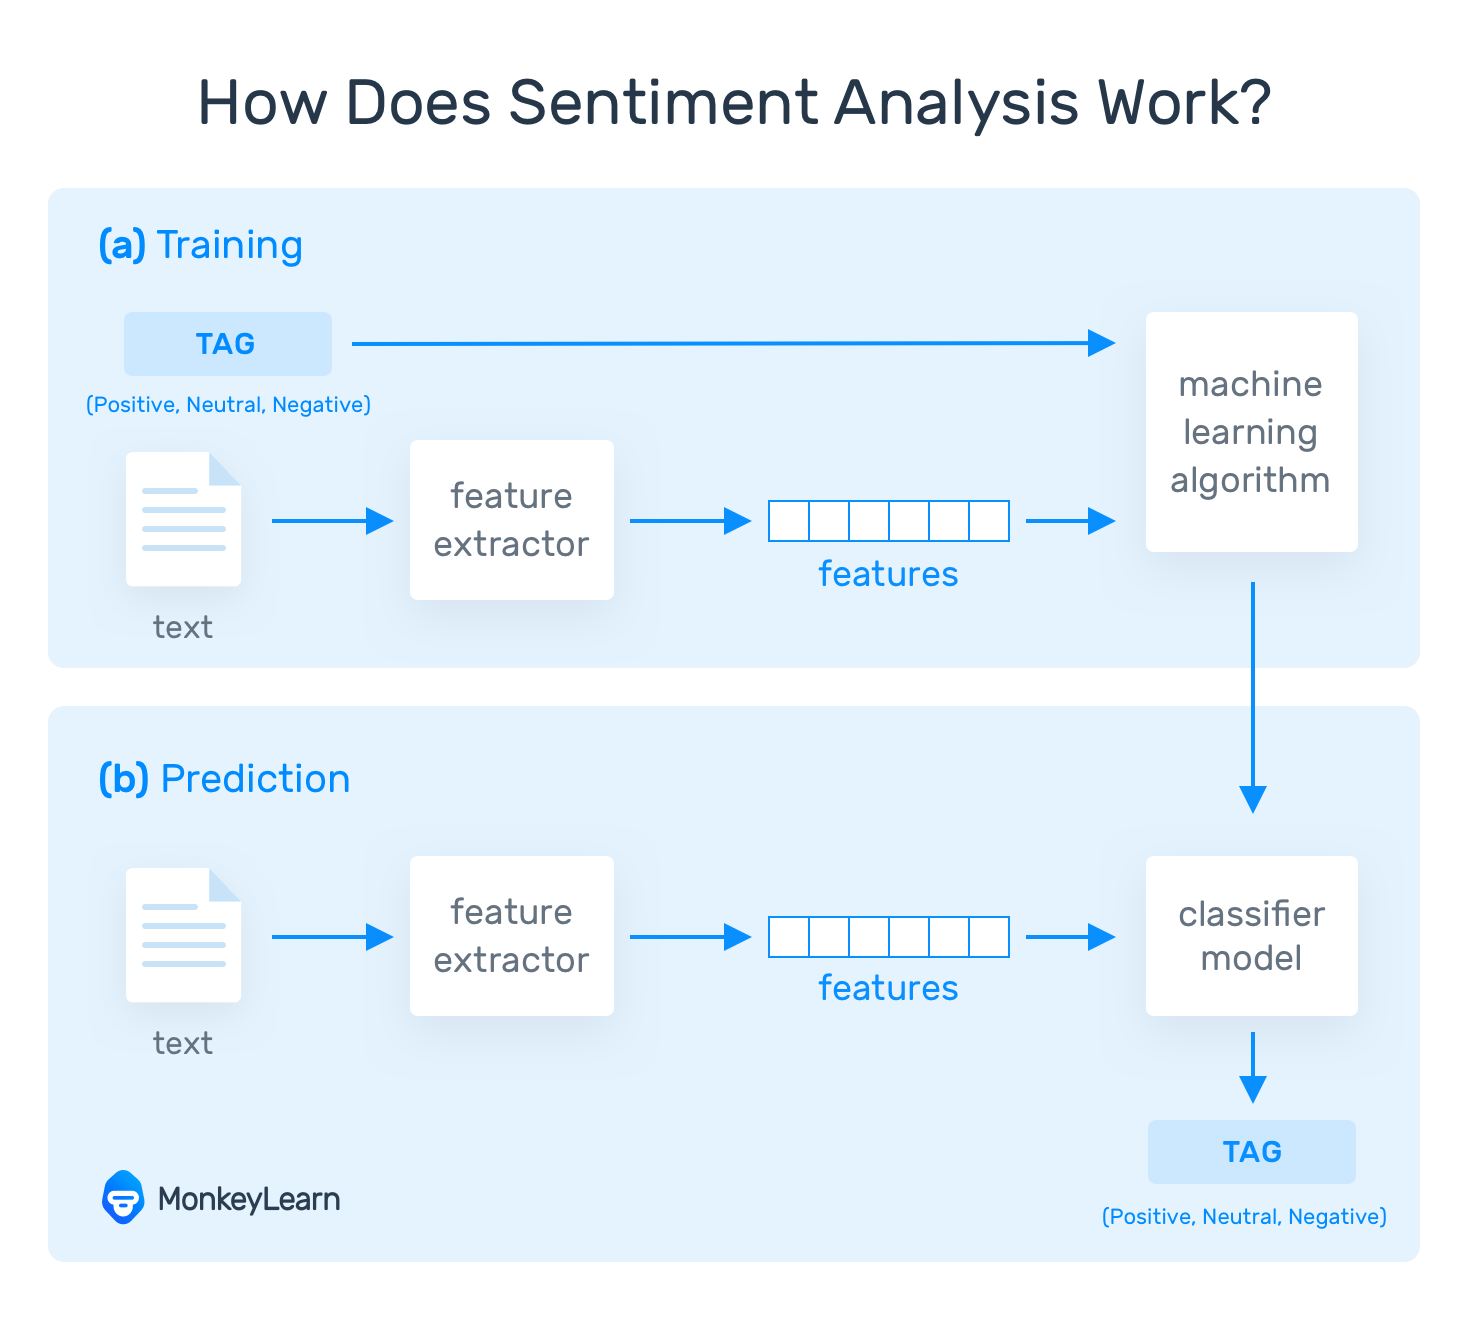 Flow chart showing how Sentiment Analysis works: Text goes through “feature extractor” then a machine learning algorithm that outputs a classification tag.